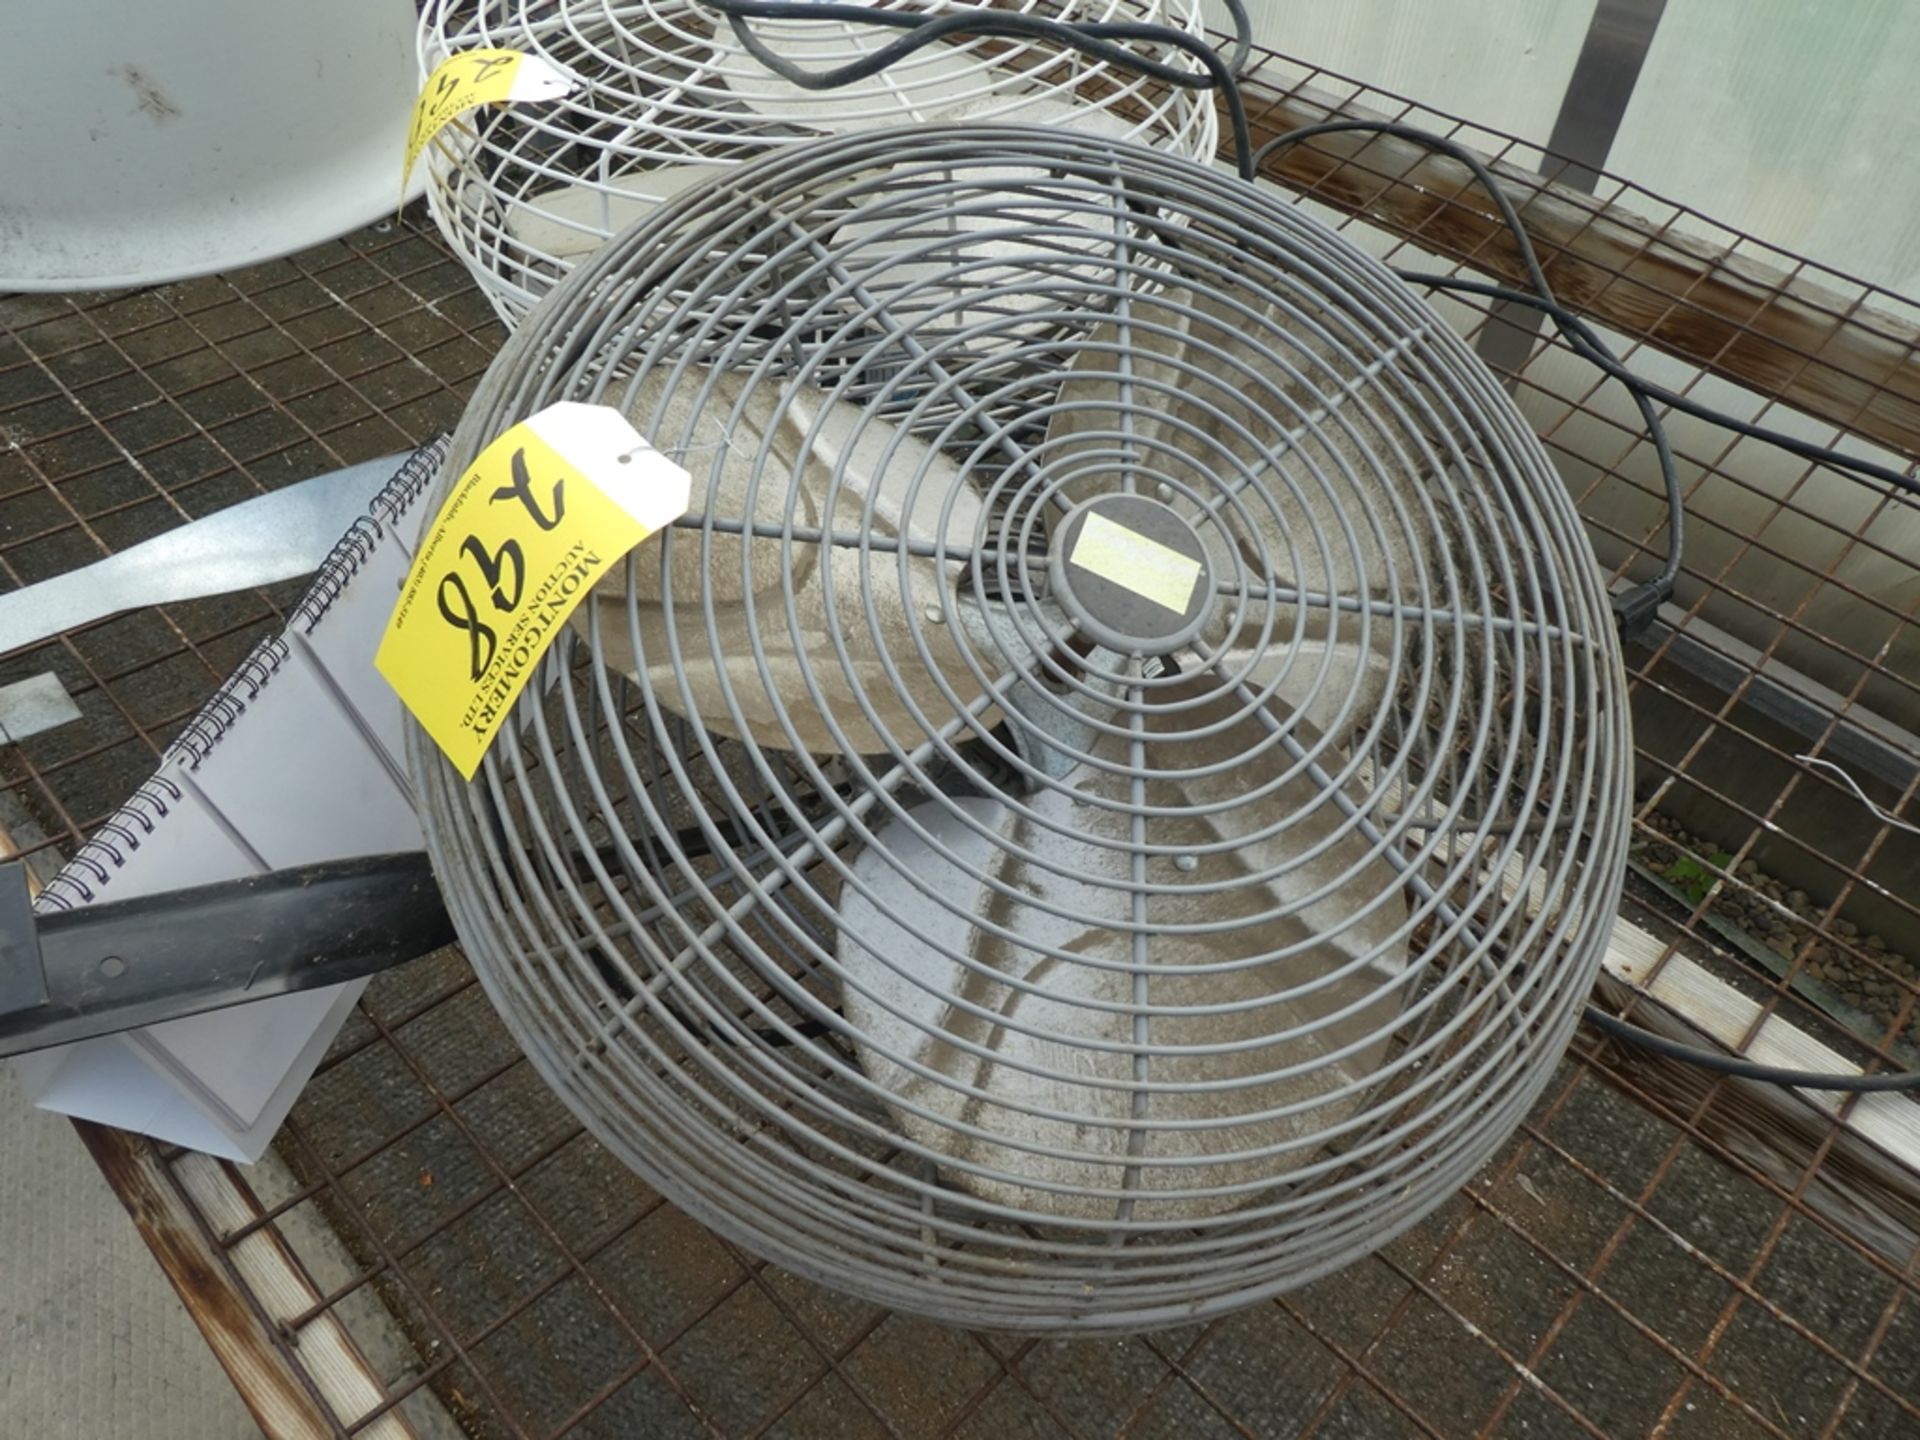 LEADER 18" AIR MOVING FAN DAYTON 20" AIR MOVING FAN - Image 3 of 3